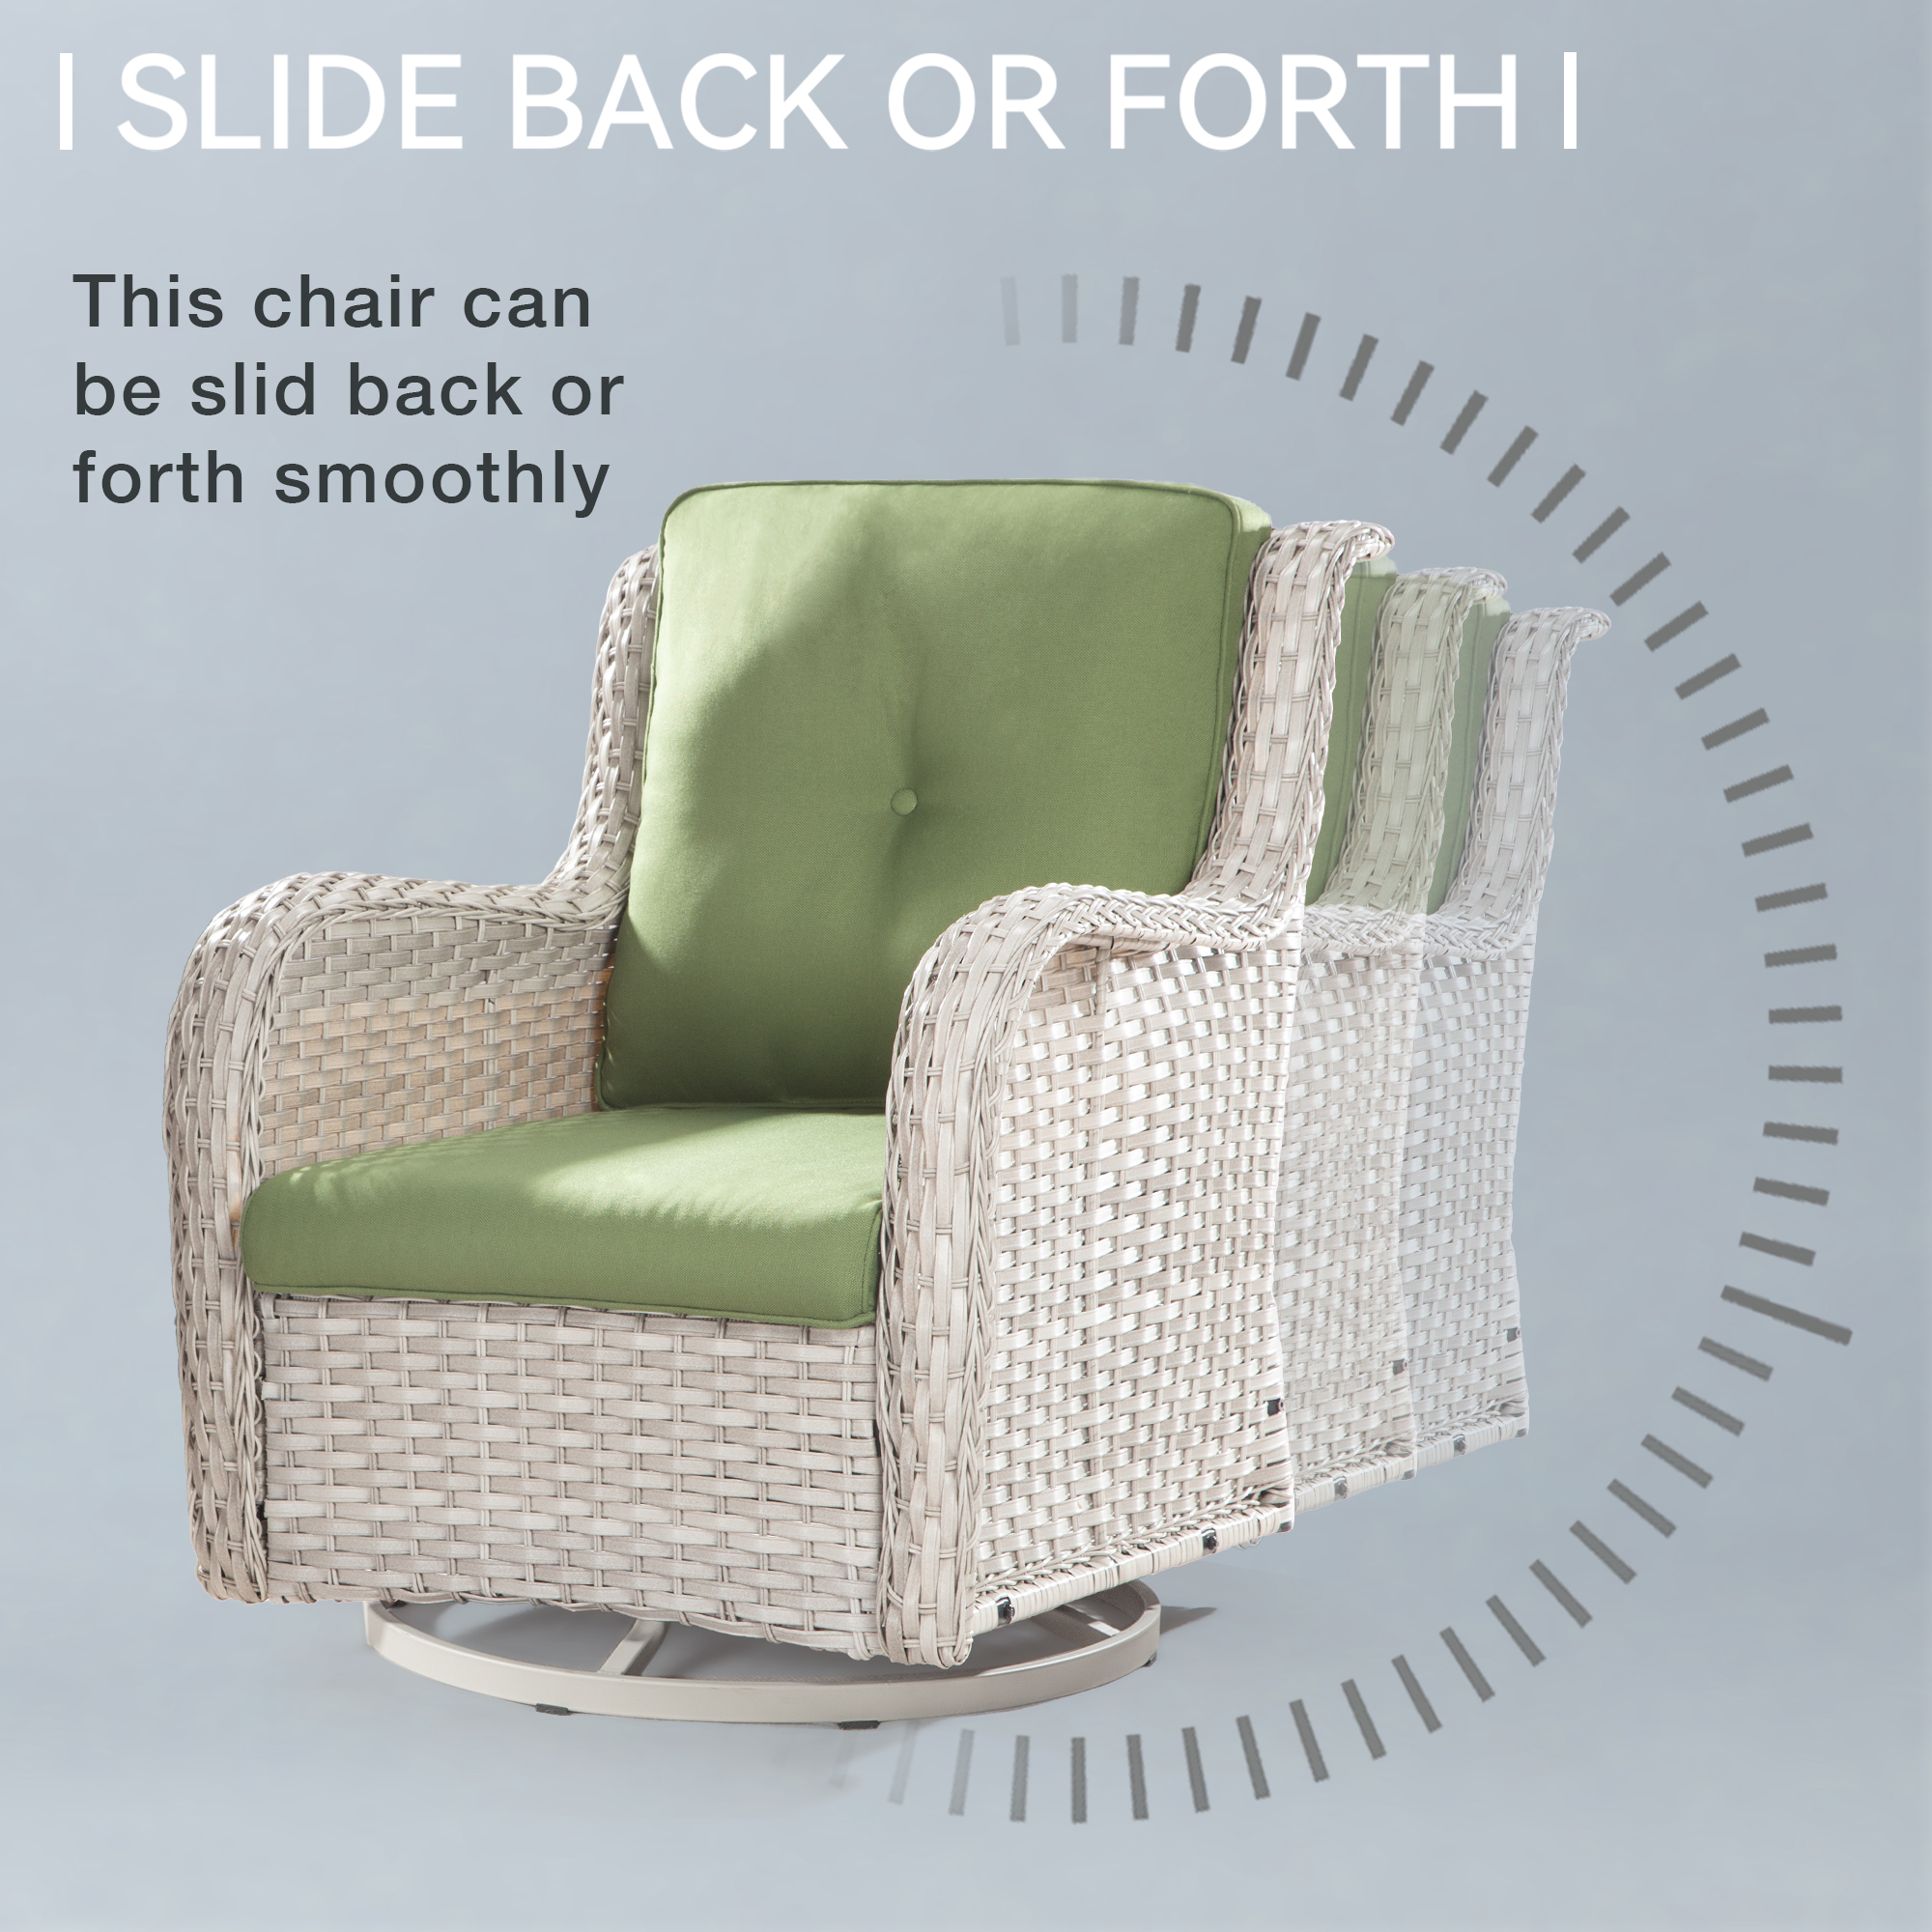 Meetleisure Outdoor Swivel Rocker Wicker Patio Chairs Sets of 2 With Table, Green - image 4 of 5